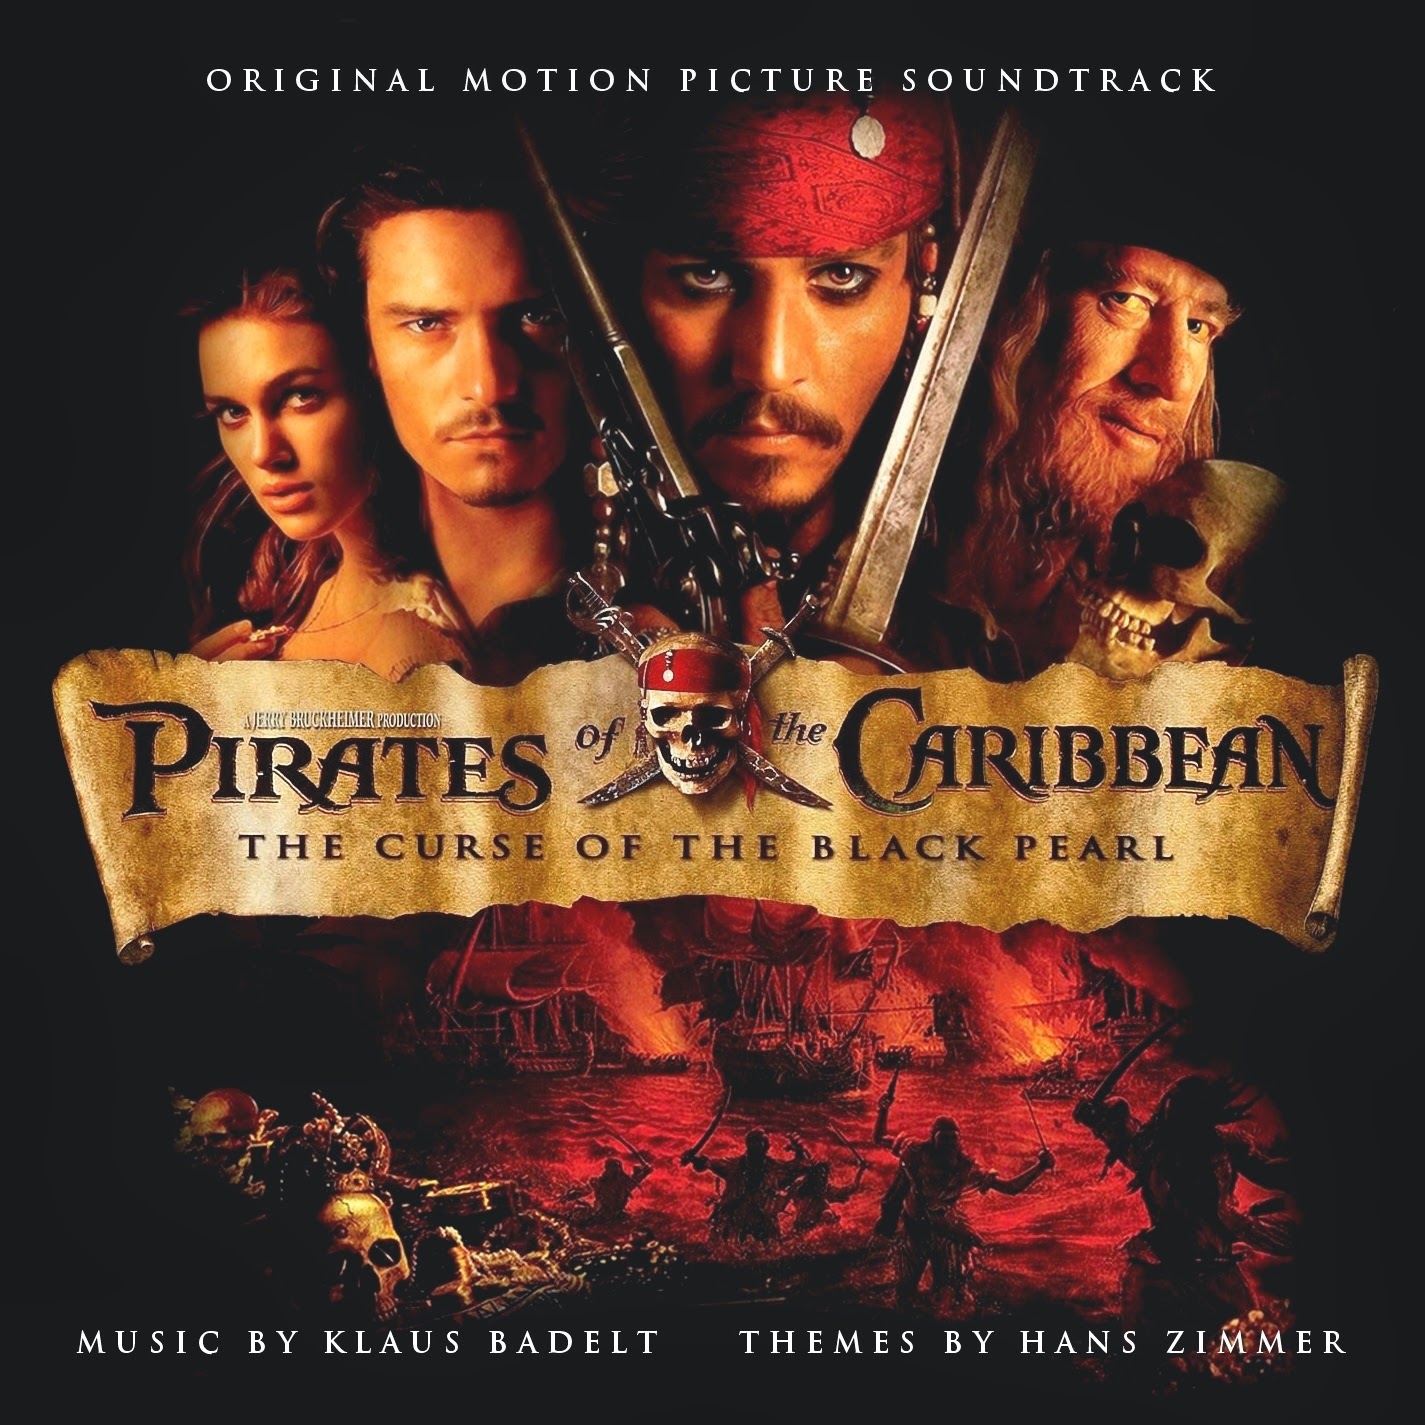 Pirates of The Caribbean: The Curse of The Black Pearl - Film With Live Orchestra at Schermerhorn Symphony Center